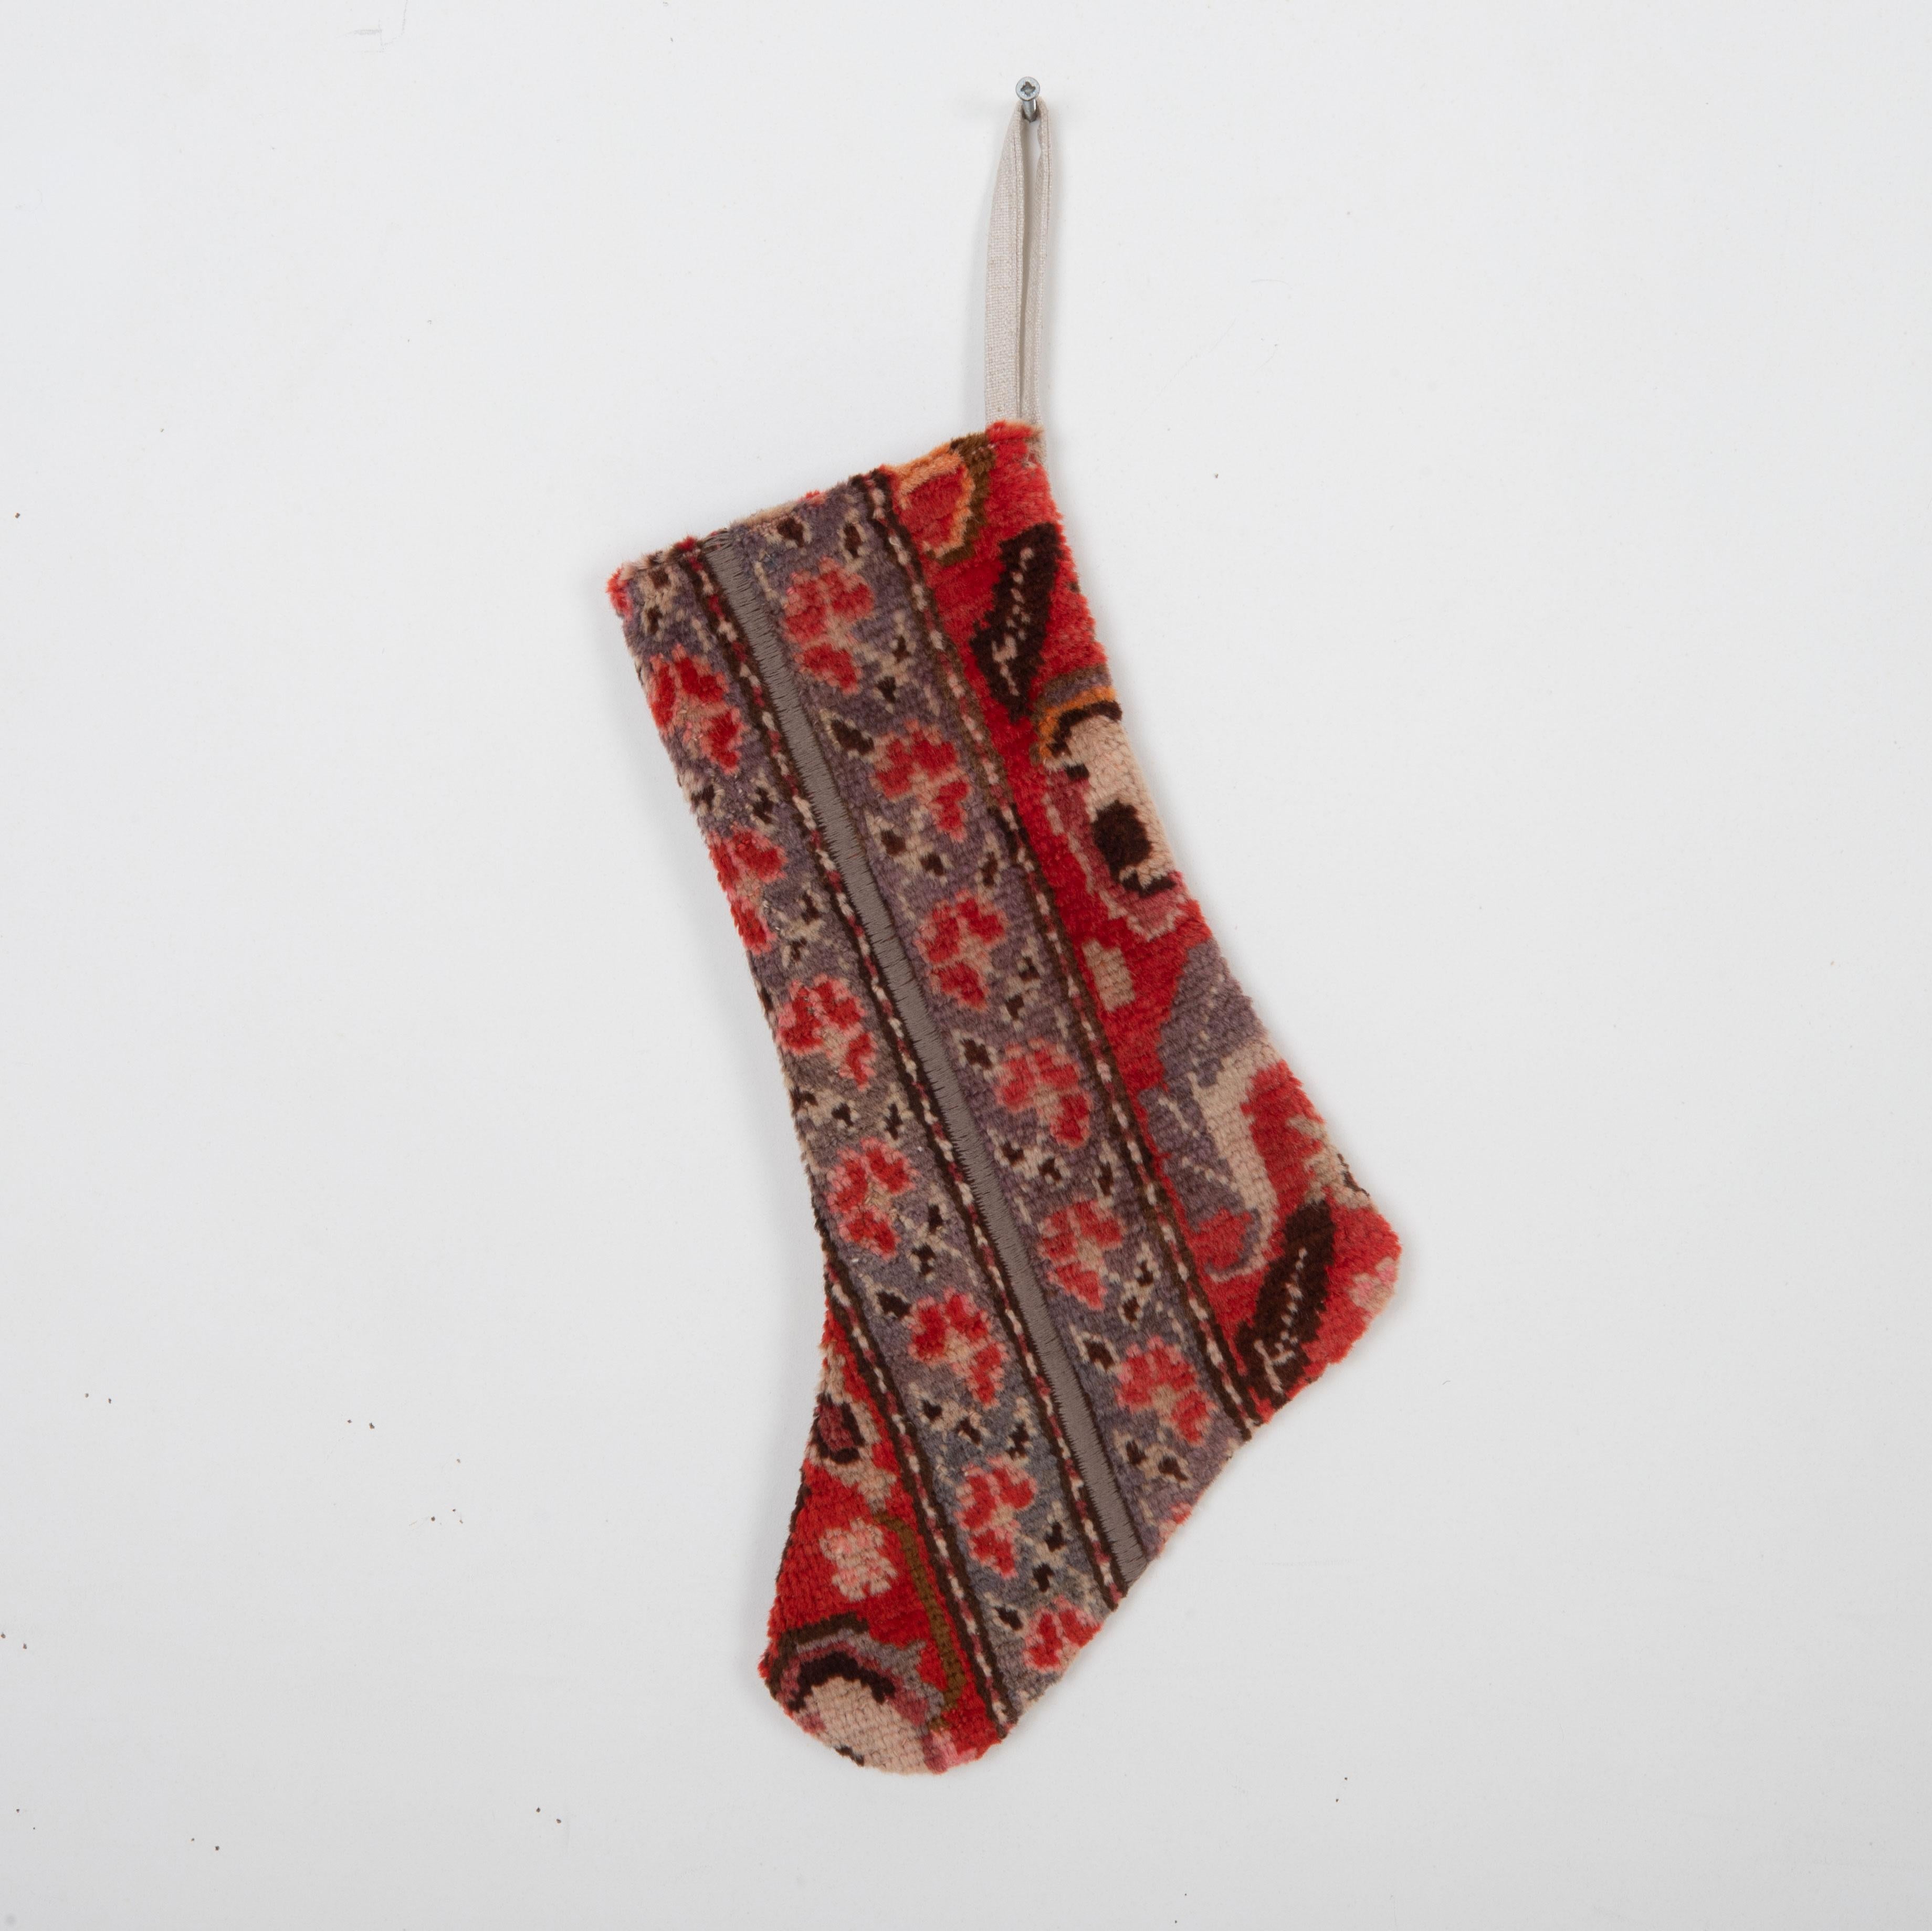 This Christmas Stocking was made from a late 19th or Early 20th C. Caucasian rug fragments.
Linen in the back.

Please note, this stocking was made from caucasian rug fragments.
